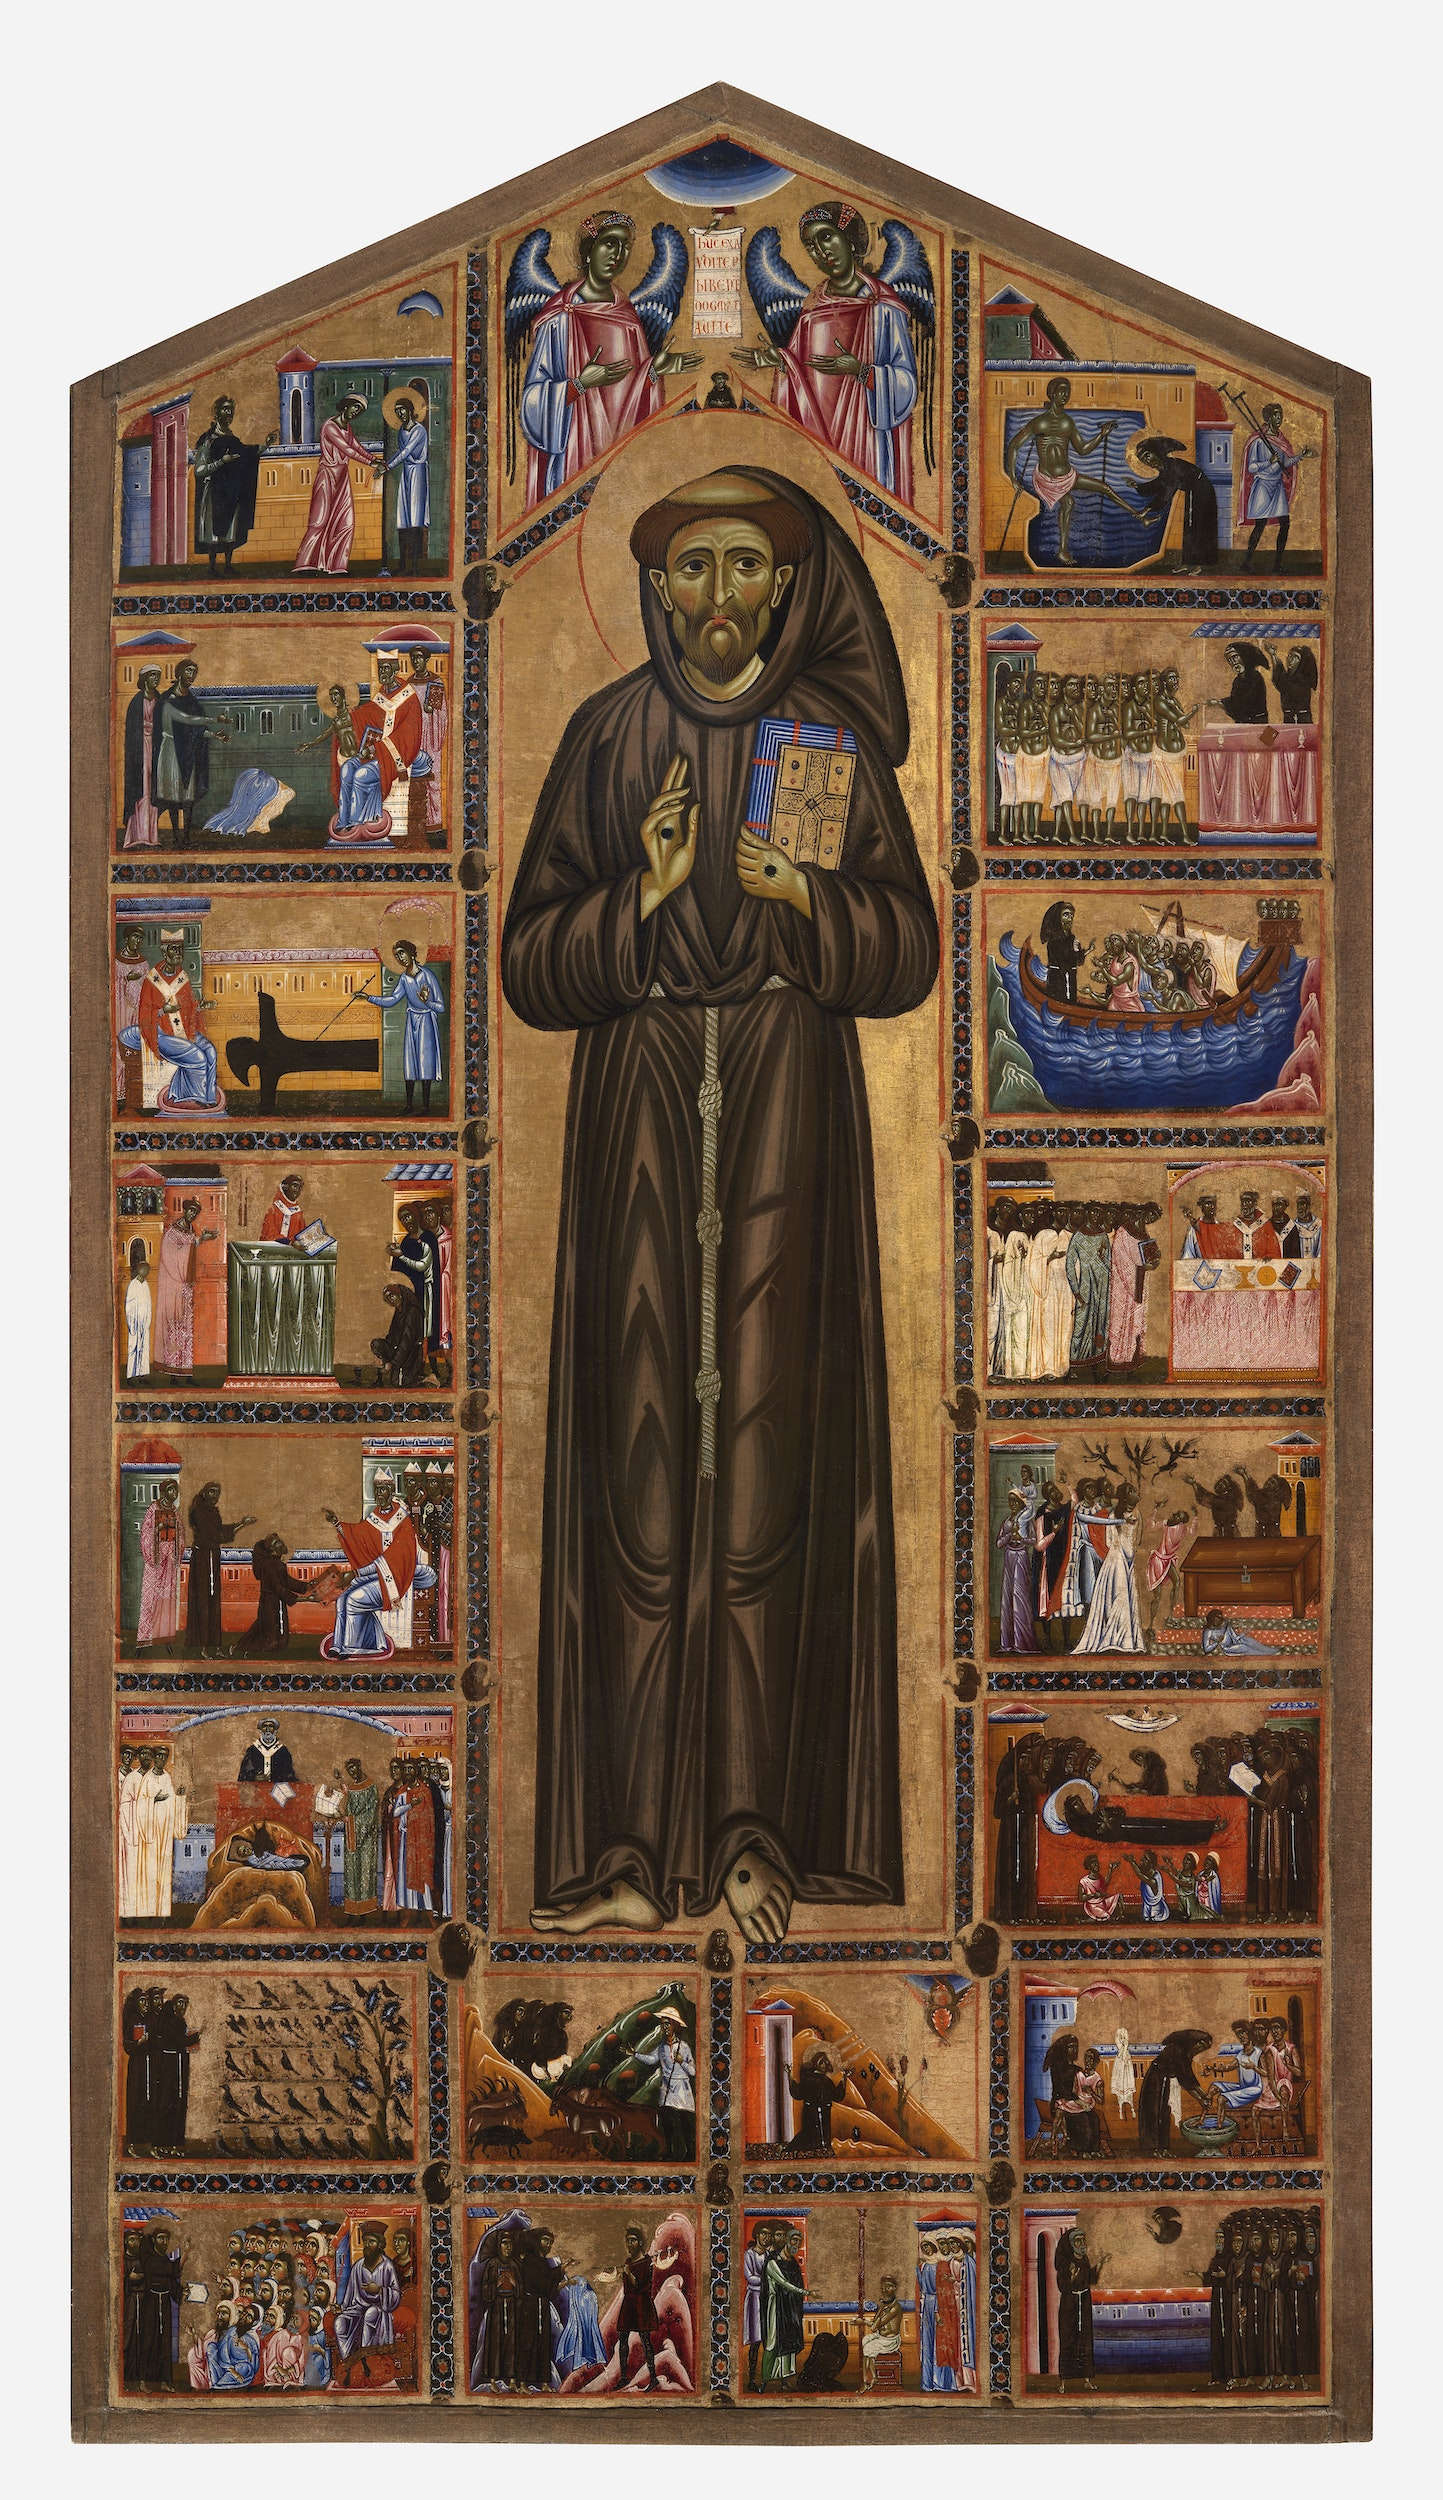 Coppo di Marcovaldo (attributed), Saint Francis and Twenty Stories from His Life (Bardi Table) (1245-1250; tempera and gold on panel, 230 x 123 cm; Florence, Santa Croce)